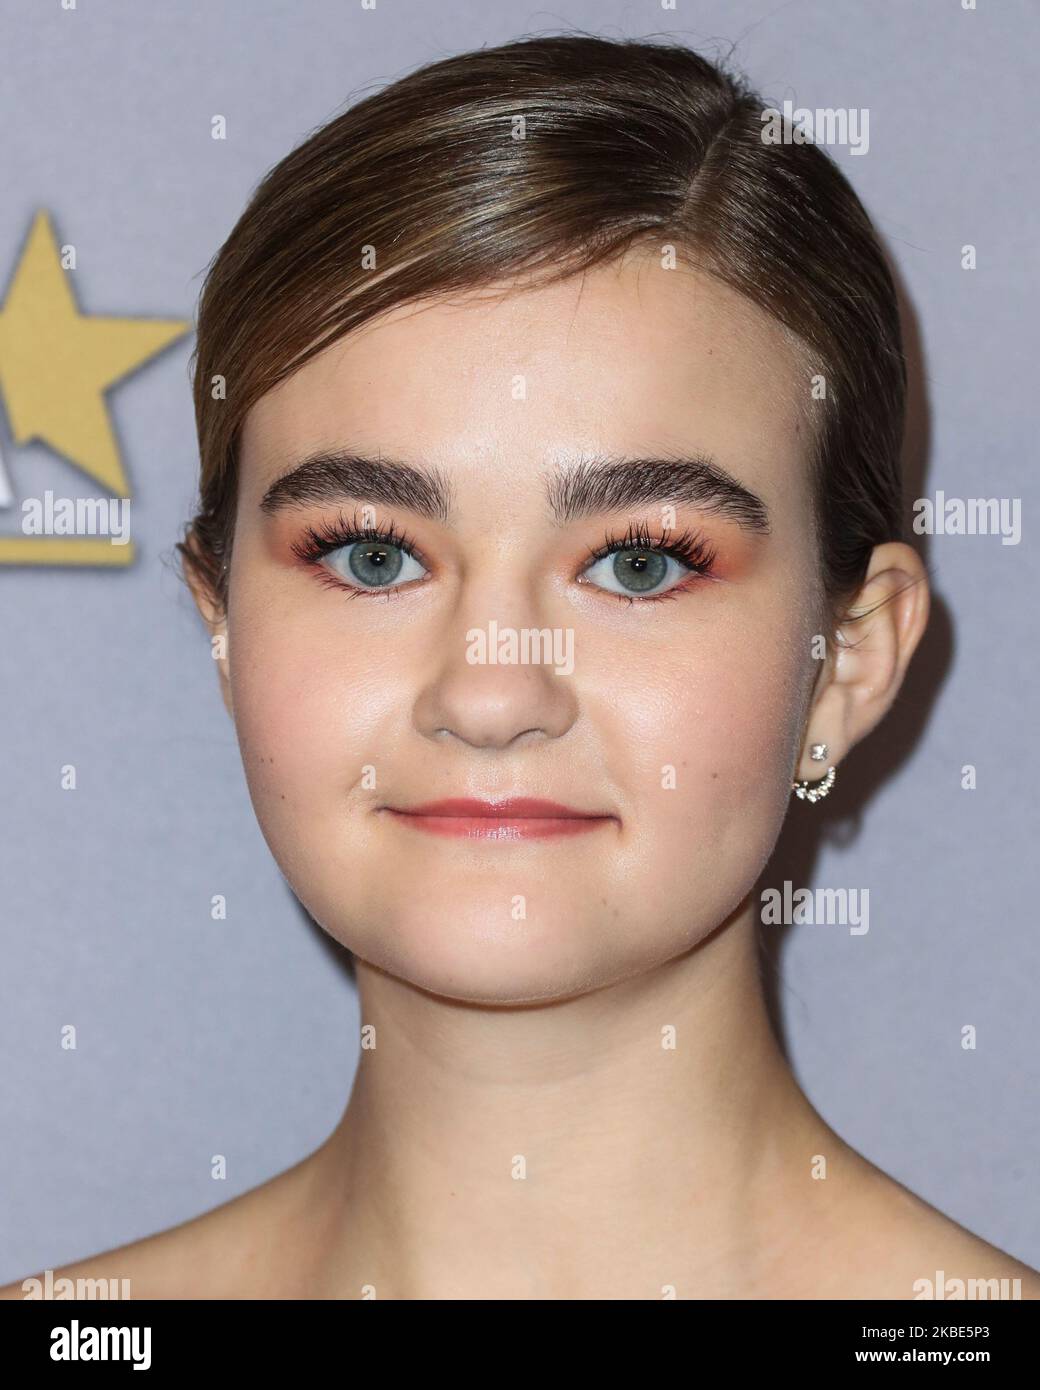 HOLLYWOOD, LOS ANGELES, CALIFORNIA, USA - JANUARY 09: Actress Millicent Simmonds arrives at the 3rd Annual Hollywood Critics' Awards held at the Taglyan Cultural Complex on January 9, 2020 in Hollywood, Los Angeles, California, United States. (Photo by Xavier Collin/Image Press Agency/NurPhoto) Stock Photo